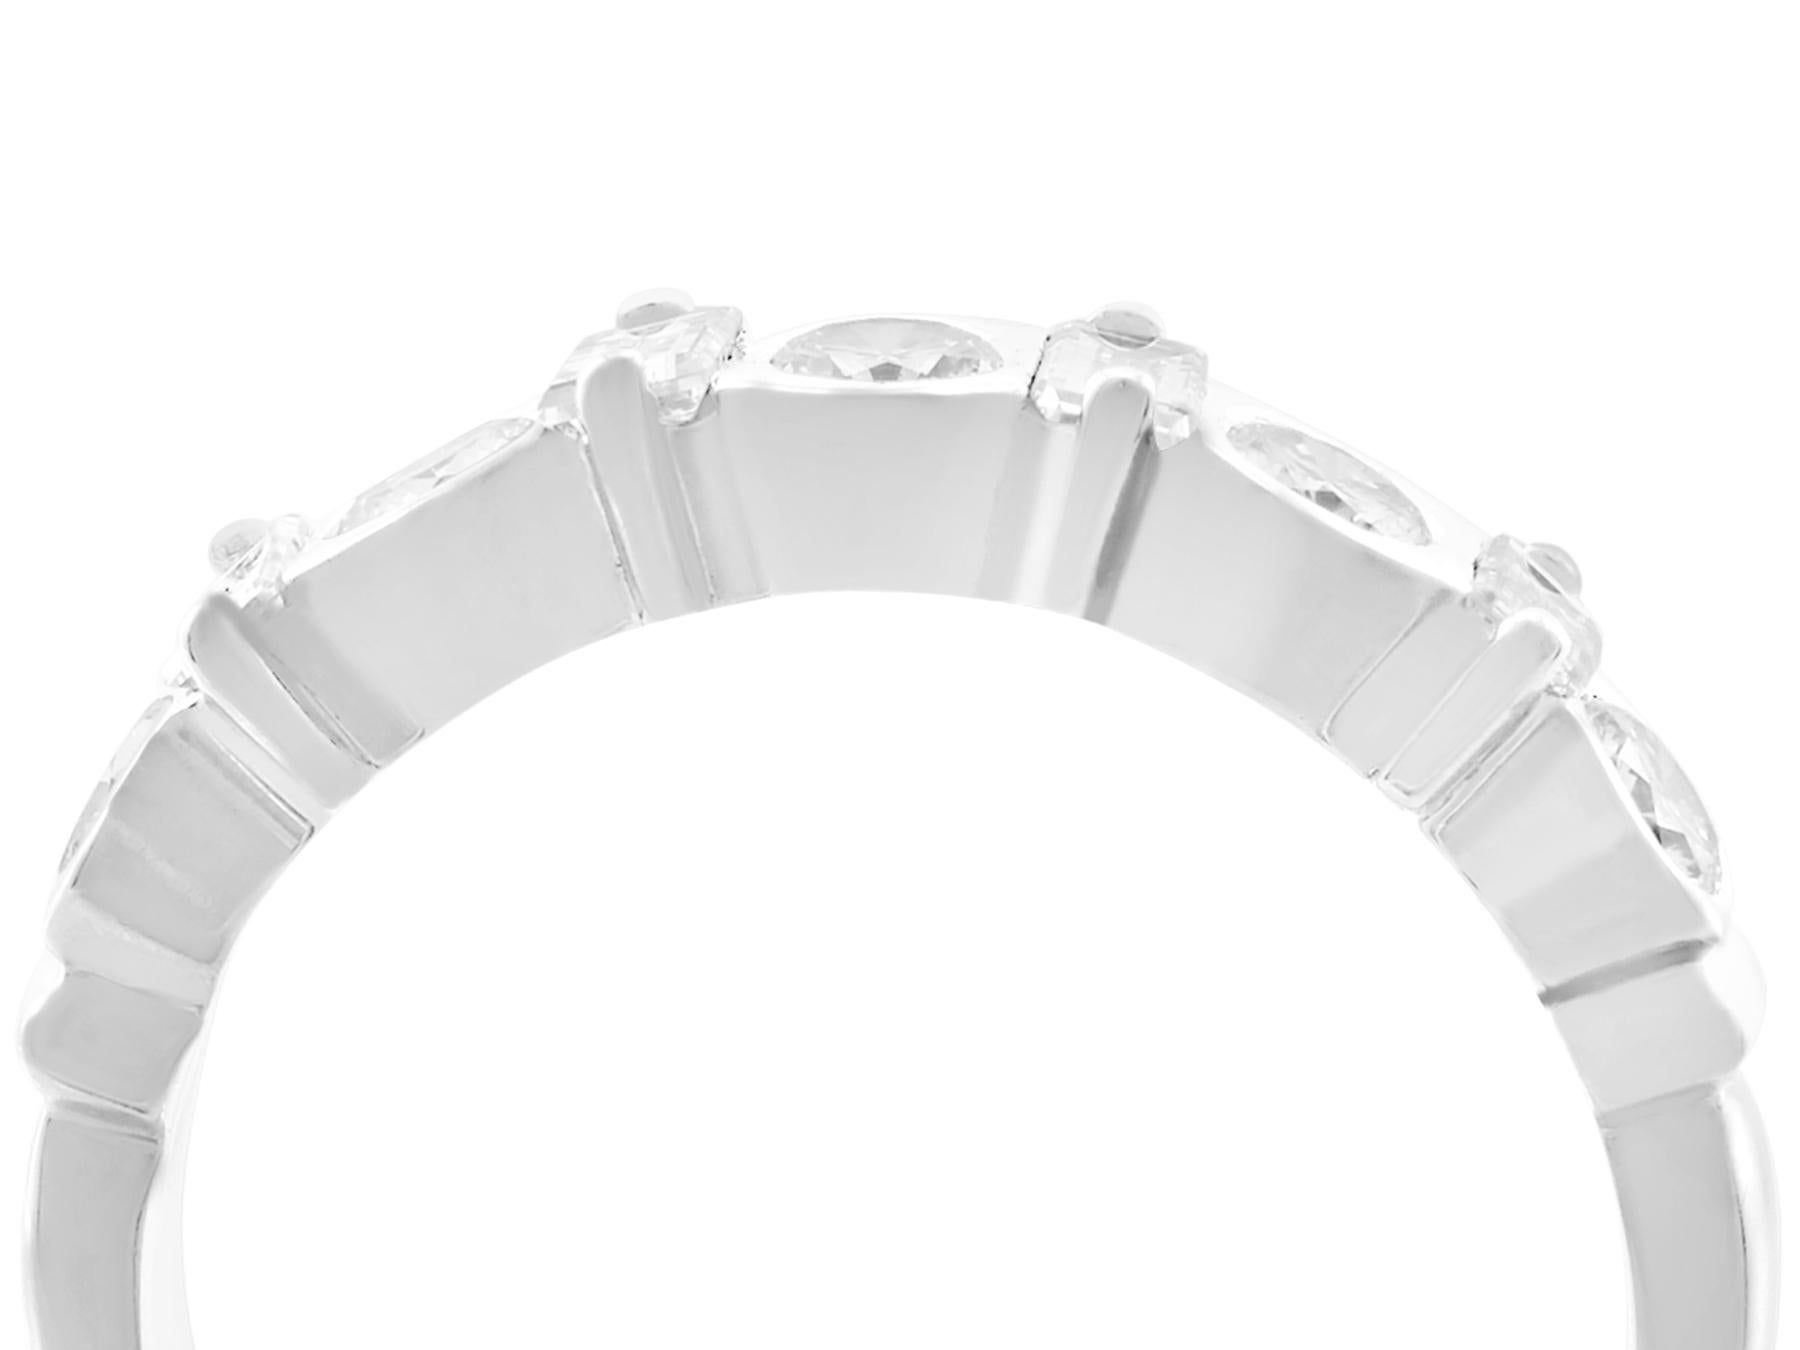 A fine and impressive vintage 0.95 carat diamond, 18 karat white gold half eternity ring; part of our diverse vintage jewelry/estate jewelry collections

This impressive unusual diamond half eternity ring has been crafted in 18k white gold.

The bar